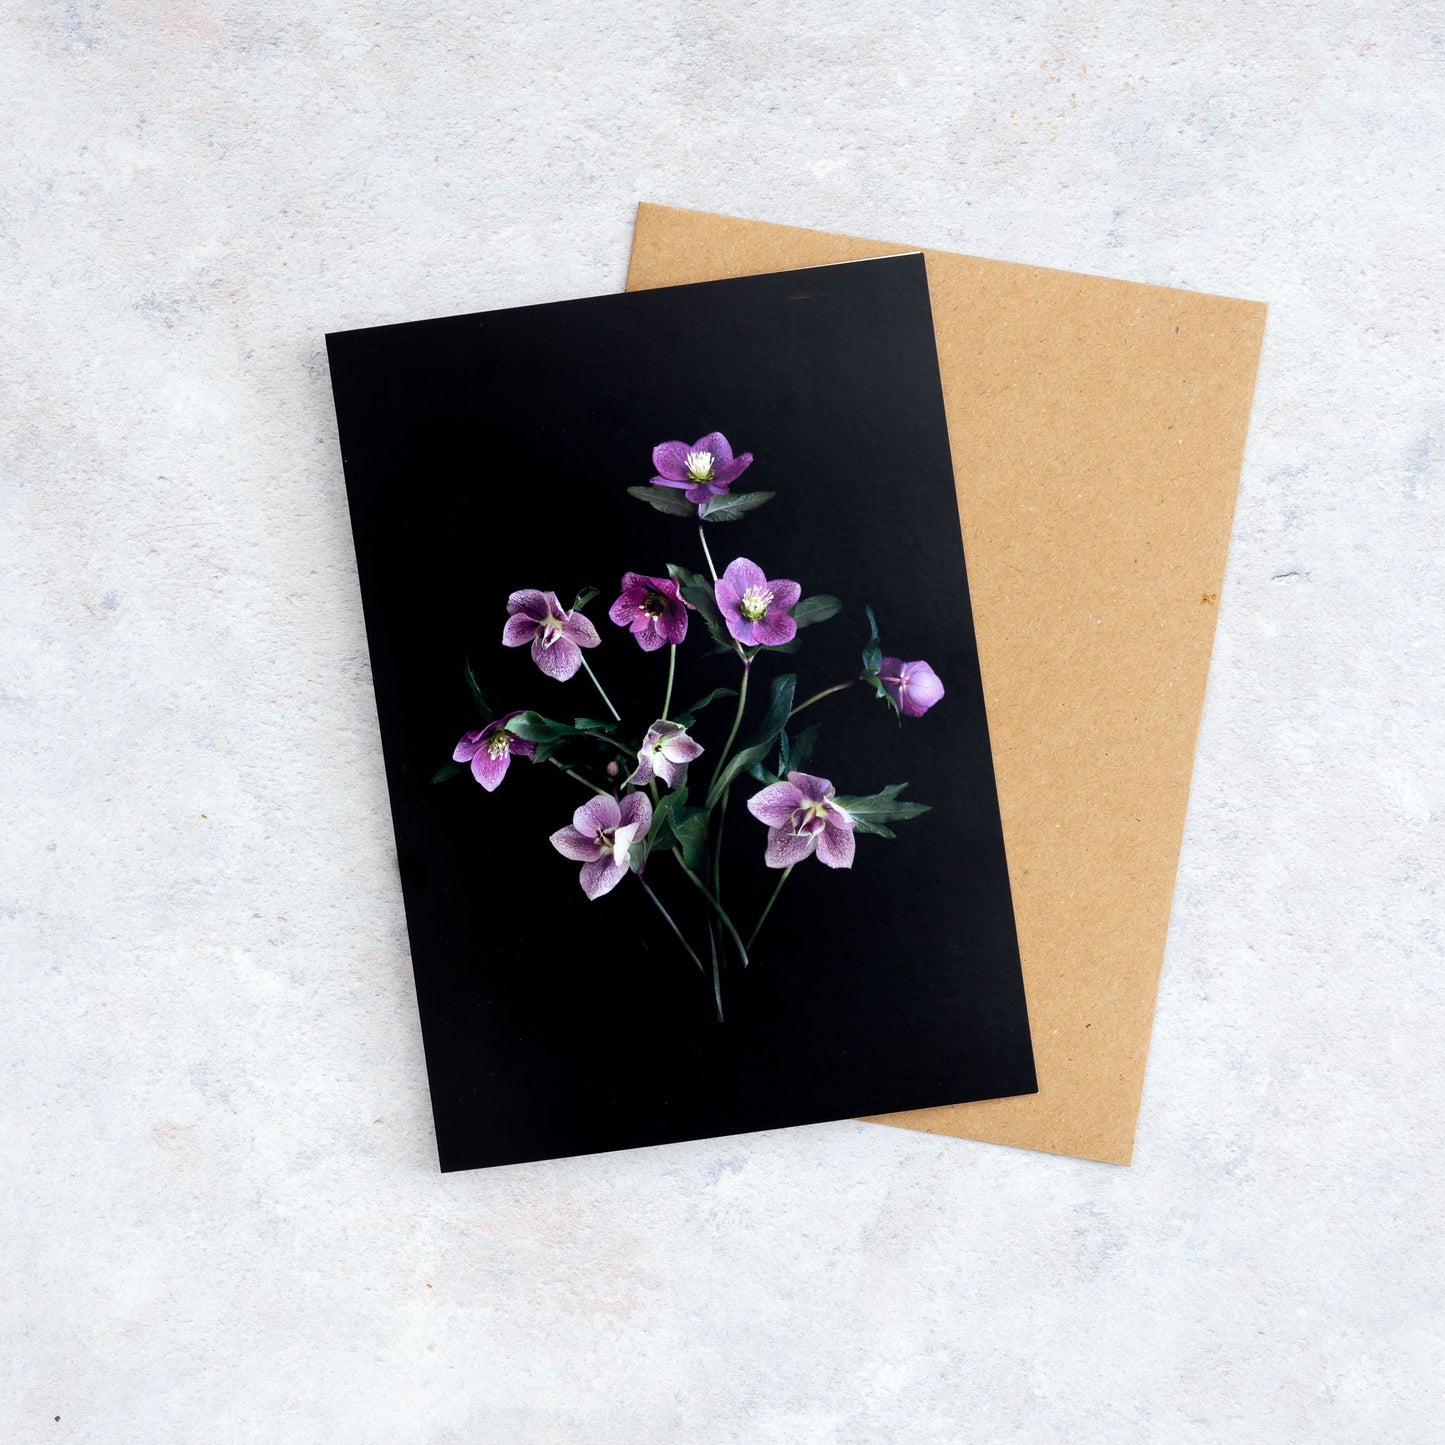 Botanical greeting card featuring Helleborus orientalis photographed on a black background.